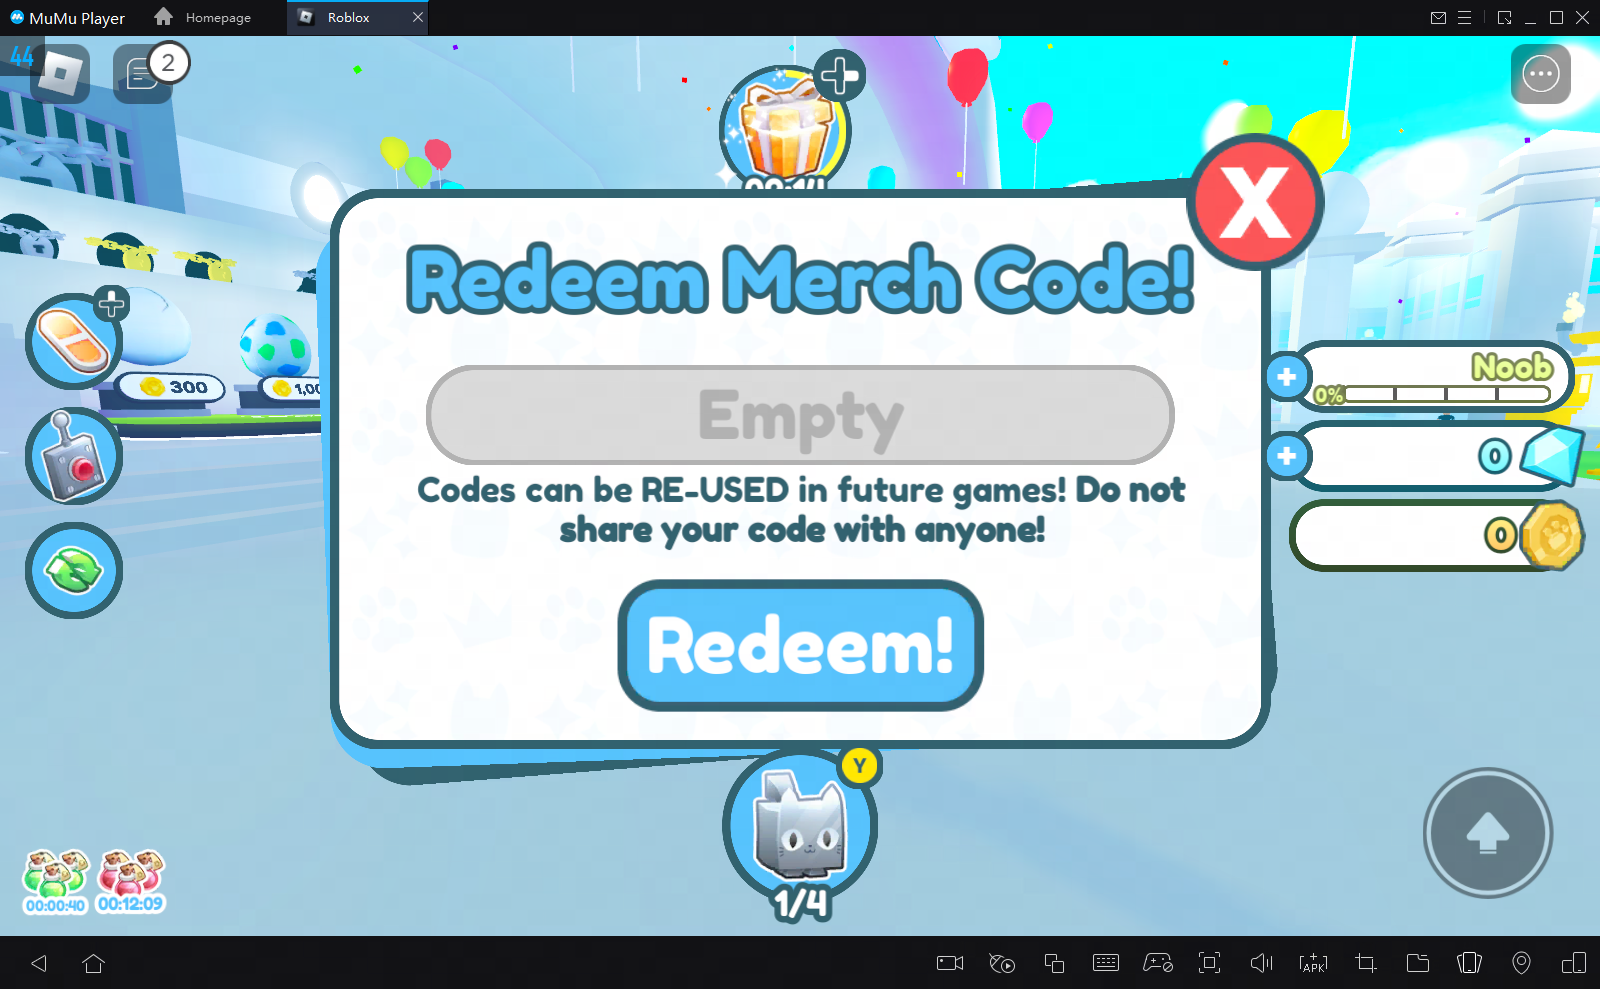 How To Redeem Roblox Codes on Mobile, Redeem Codes On Roblox